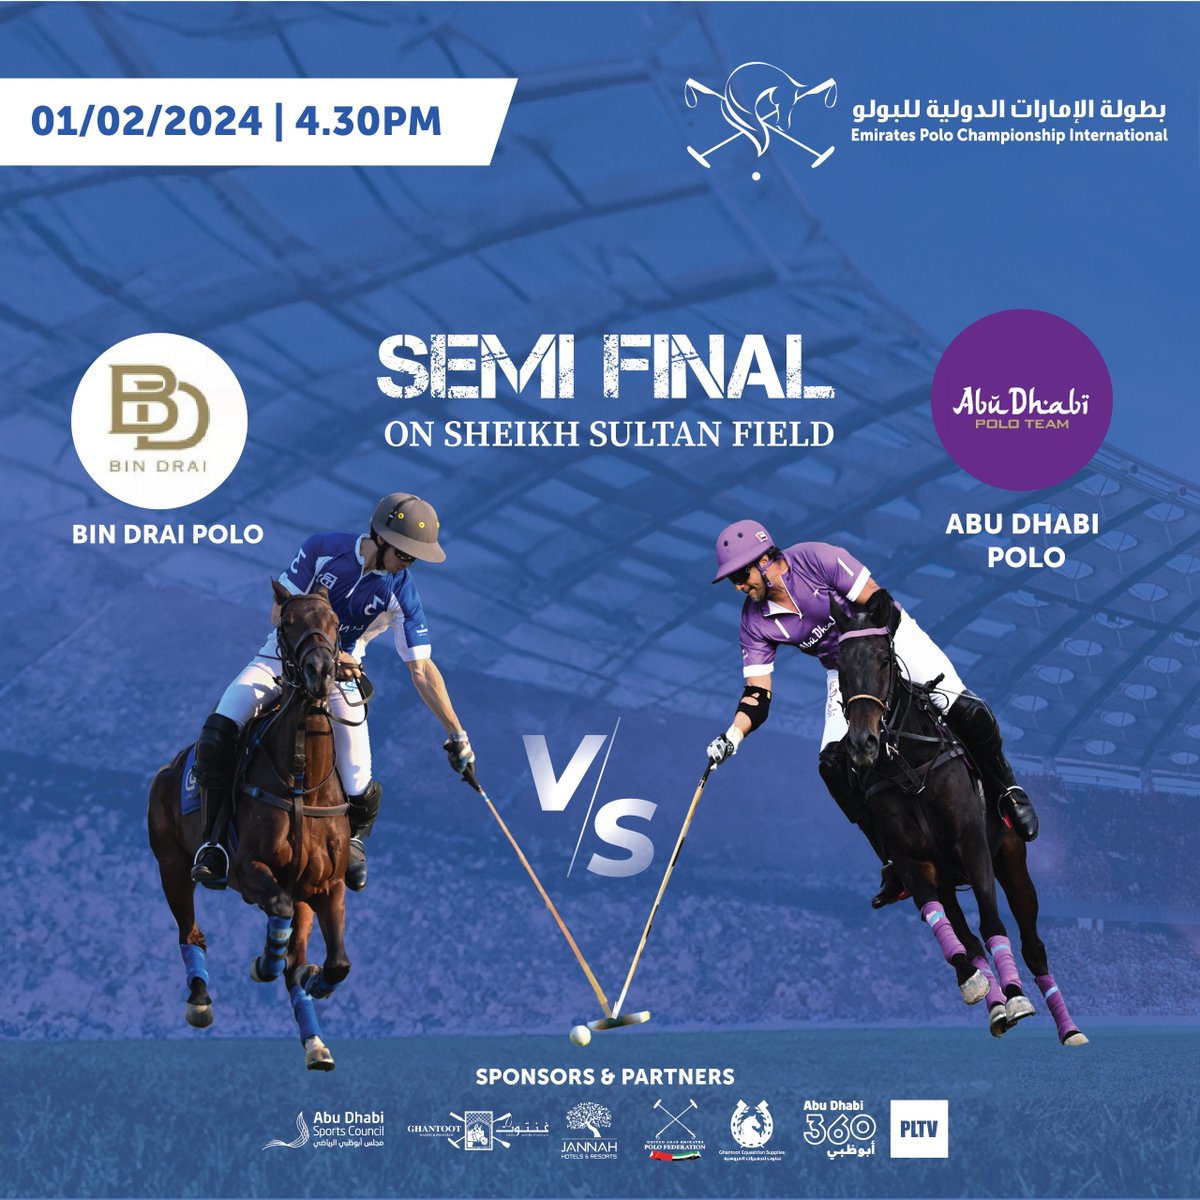 The excitement continues today in the Semi Final of the Emirates Polo Championship at Ghantoot Racing and Polo Club!

Ghantoot Polo vs Lamar Polo 3pm
Bin Drai Polo vs Abu Dhai Polo 4:30pm 

Who will make it to the final on Sunday, 4th February?